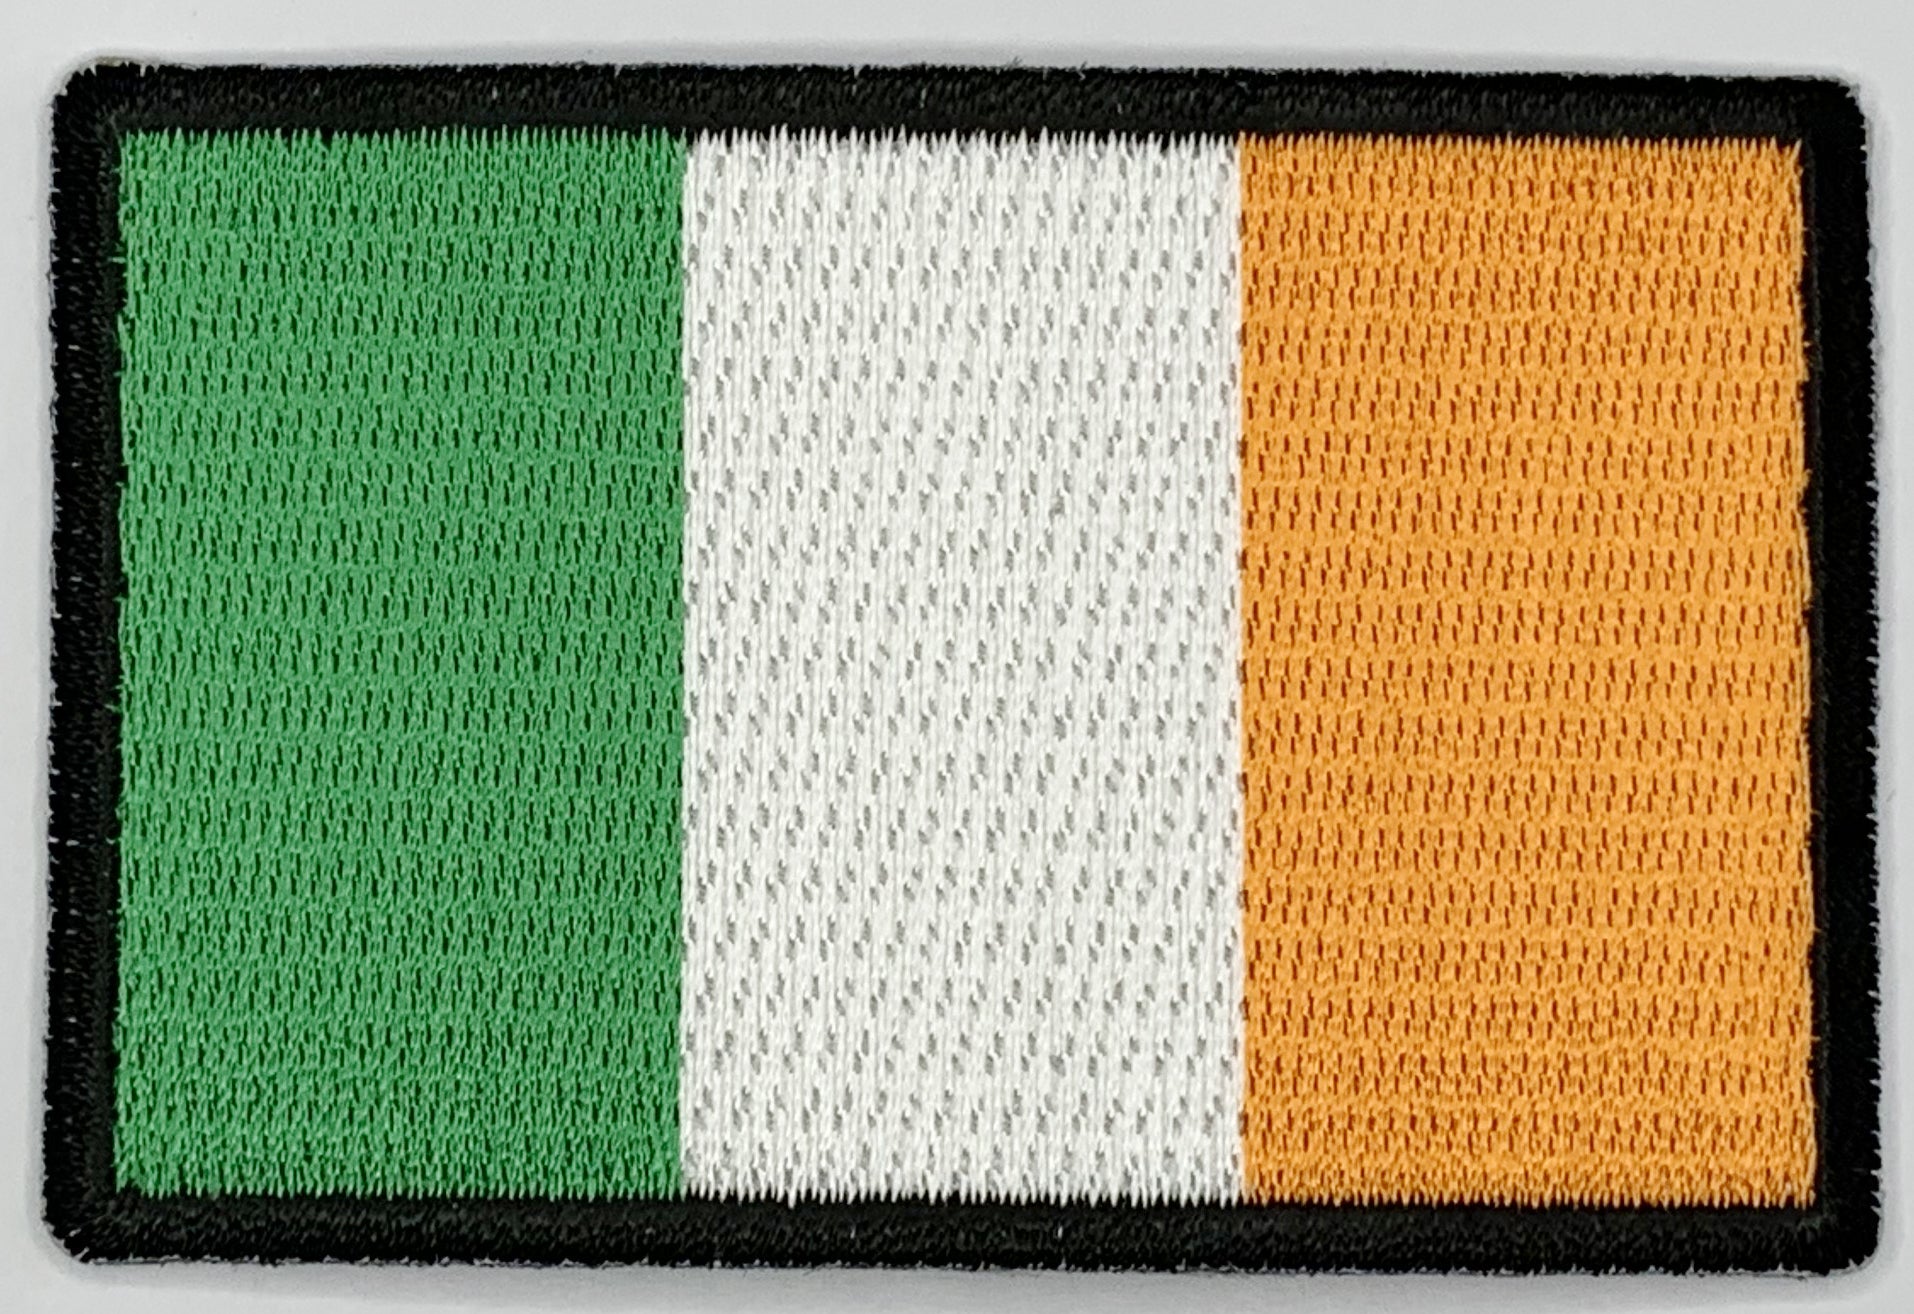 Irish Flag Iron On Patch. Great for attaching to your jackets, shirts, pants, jeans, hats.  Size: 7.62x5.08cm